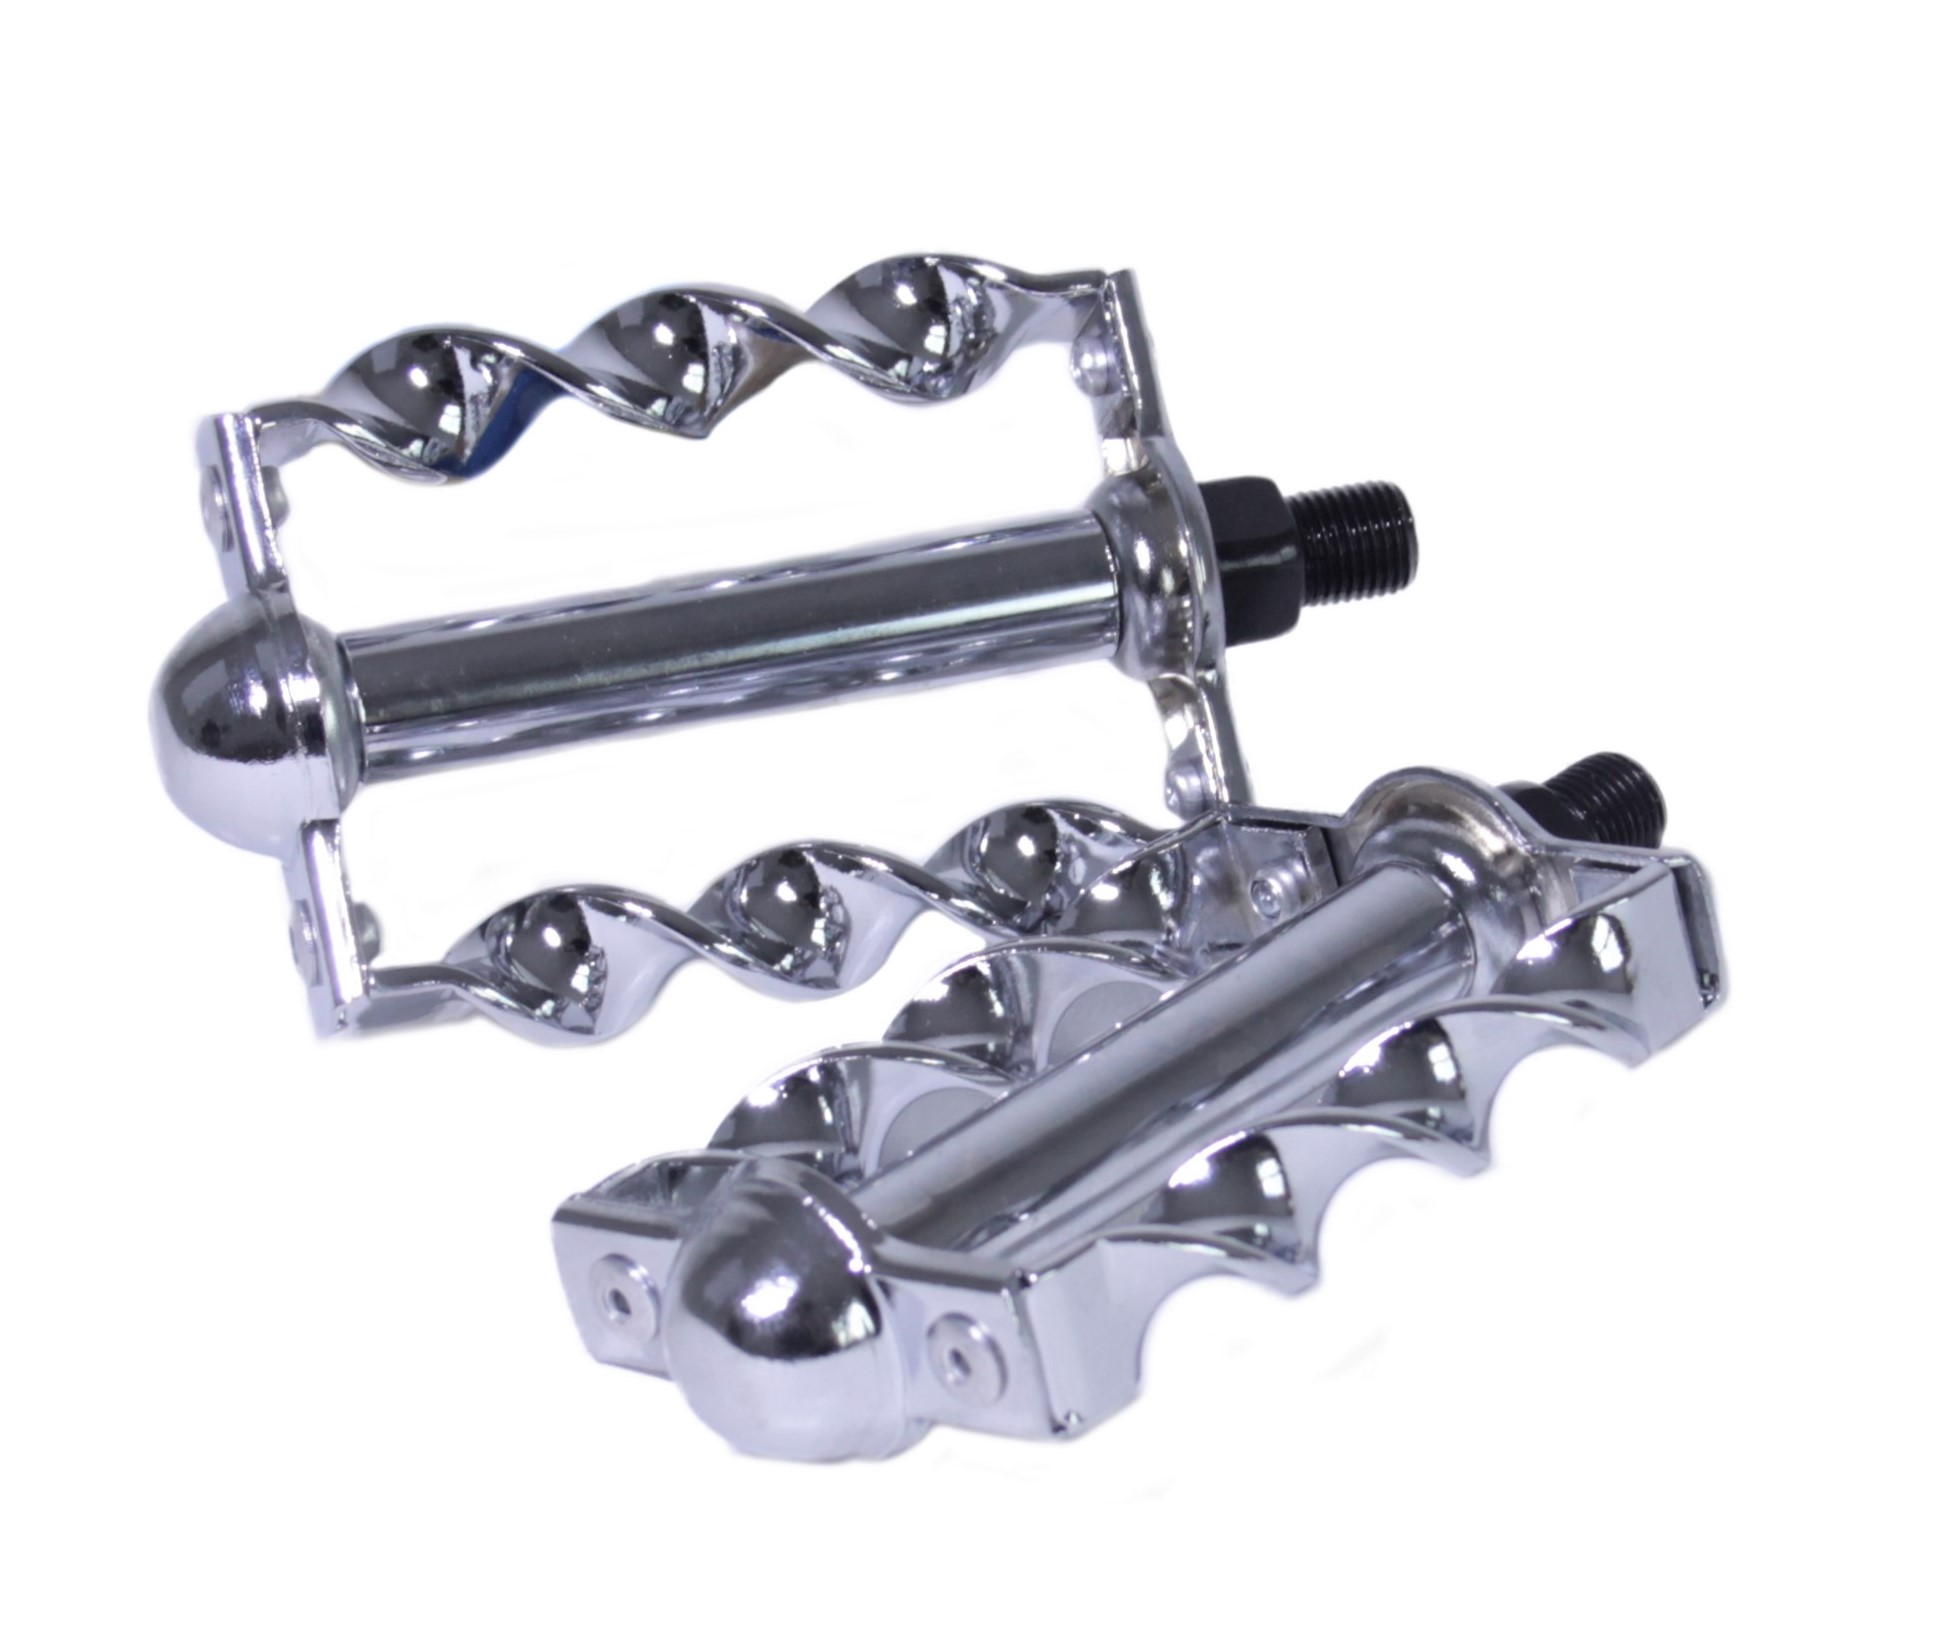 Lowrider Pedals, twisted, chrome 9/16 inch thread, CP, one pair